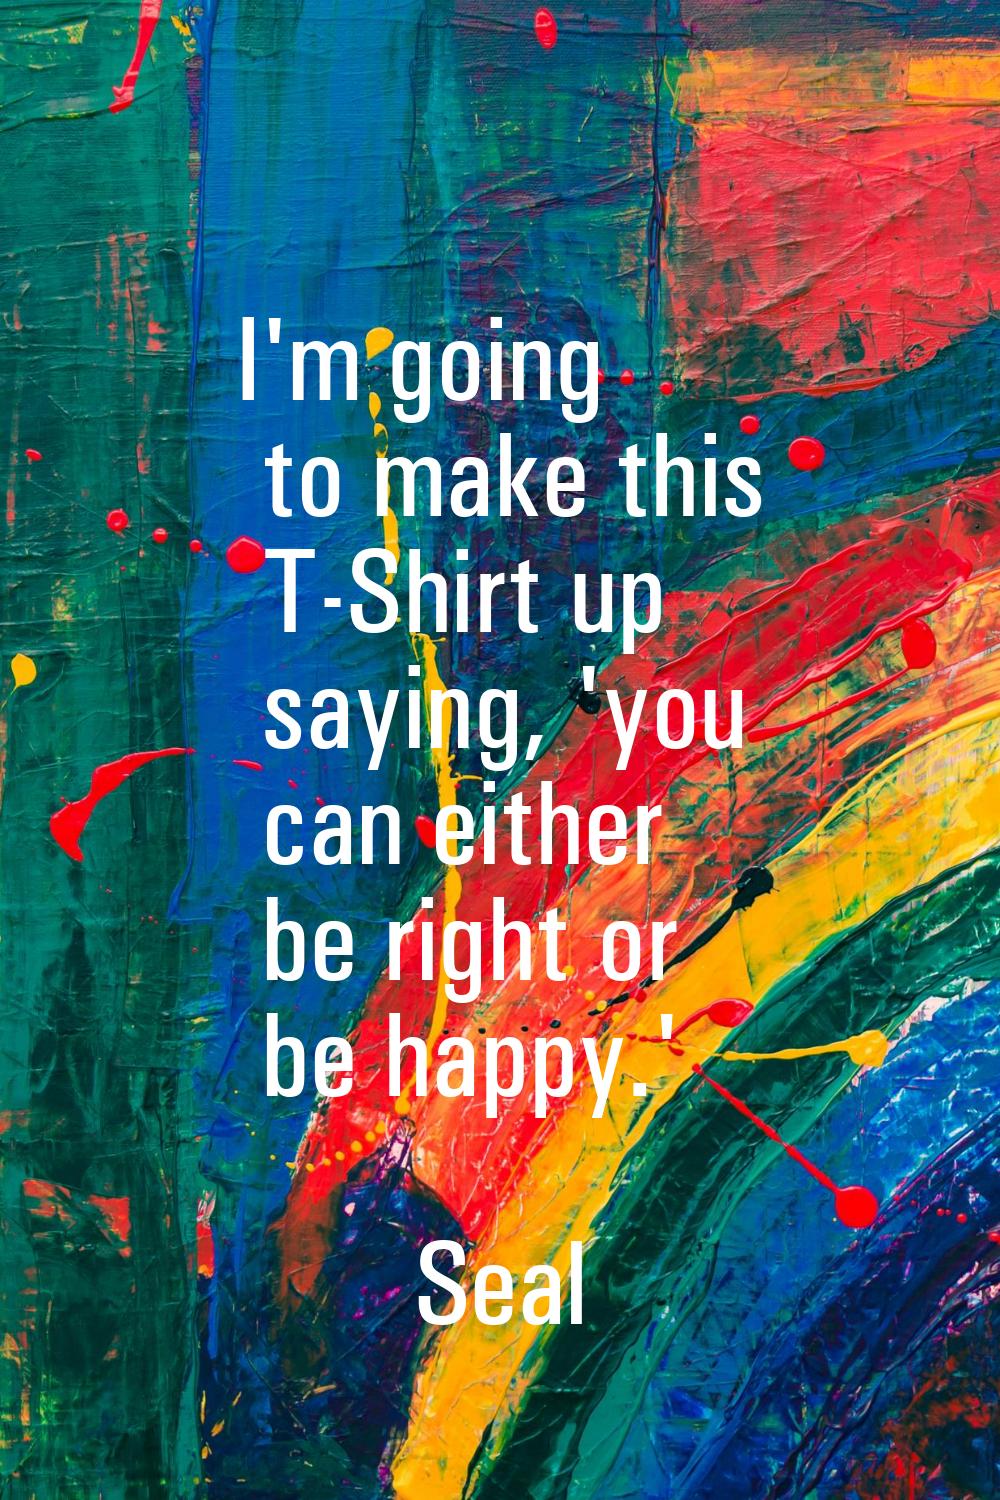 I'm going to make this T-Shirt up saying, 'you can either be right or be happy.'